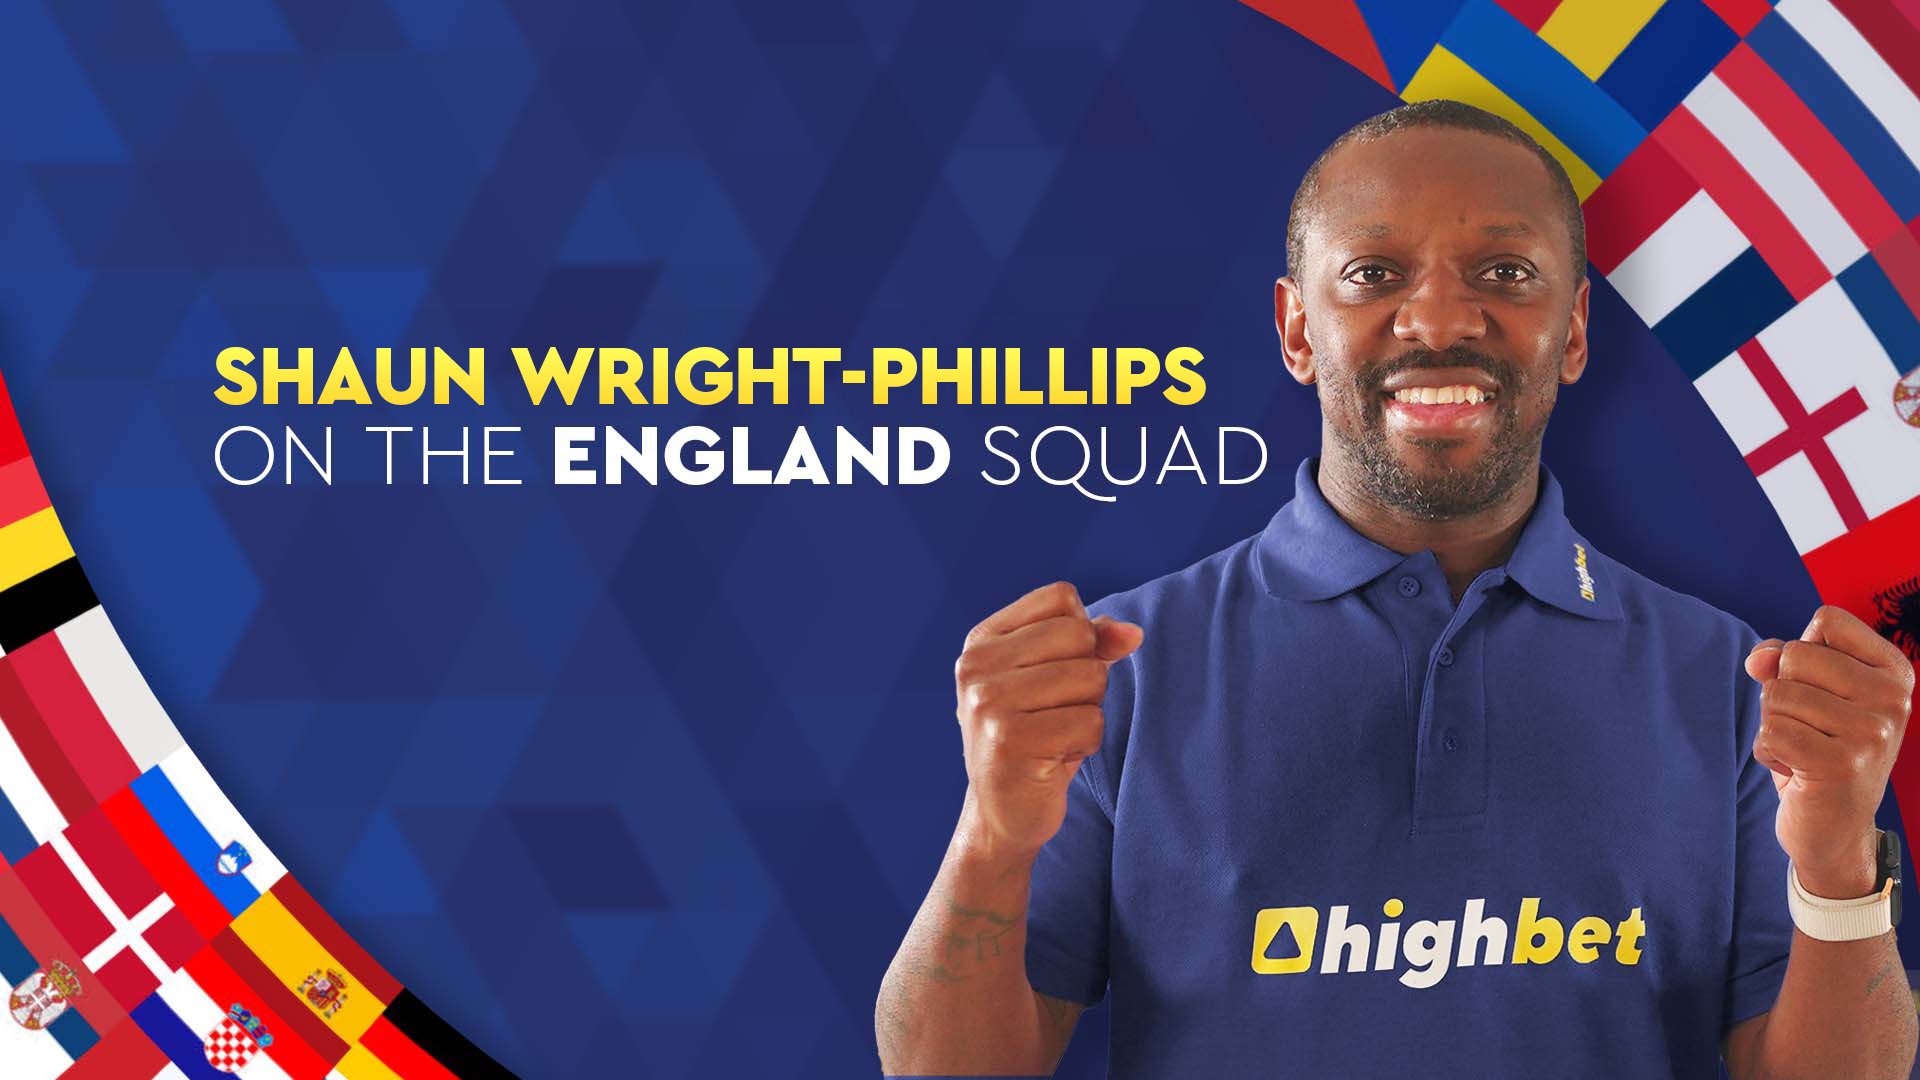 Video: Shaun Wright-Phillips on the England squad